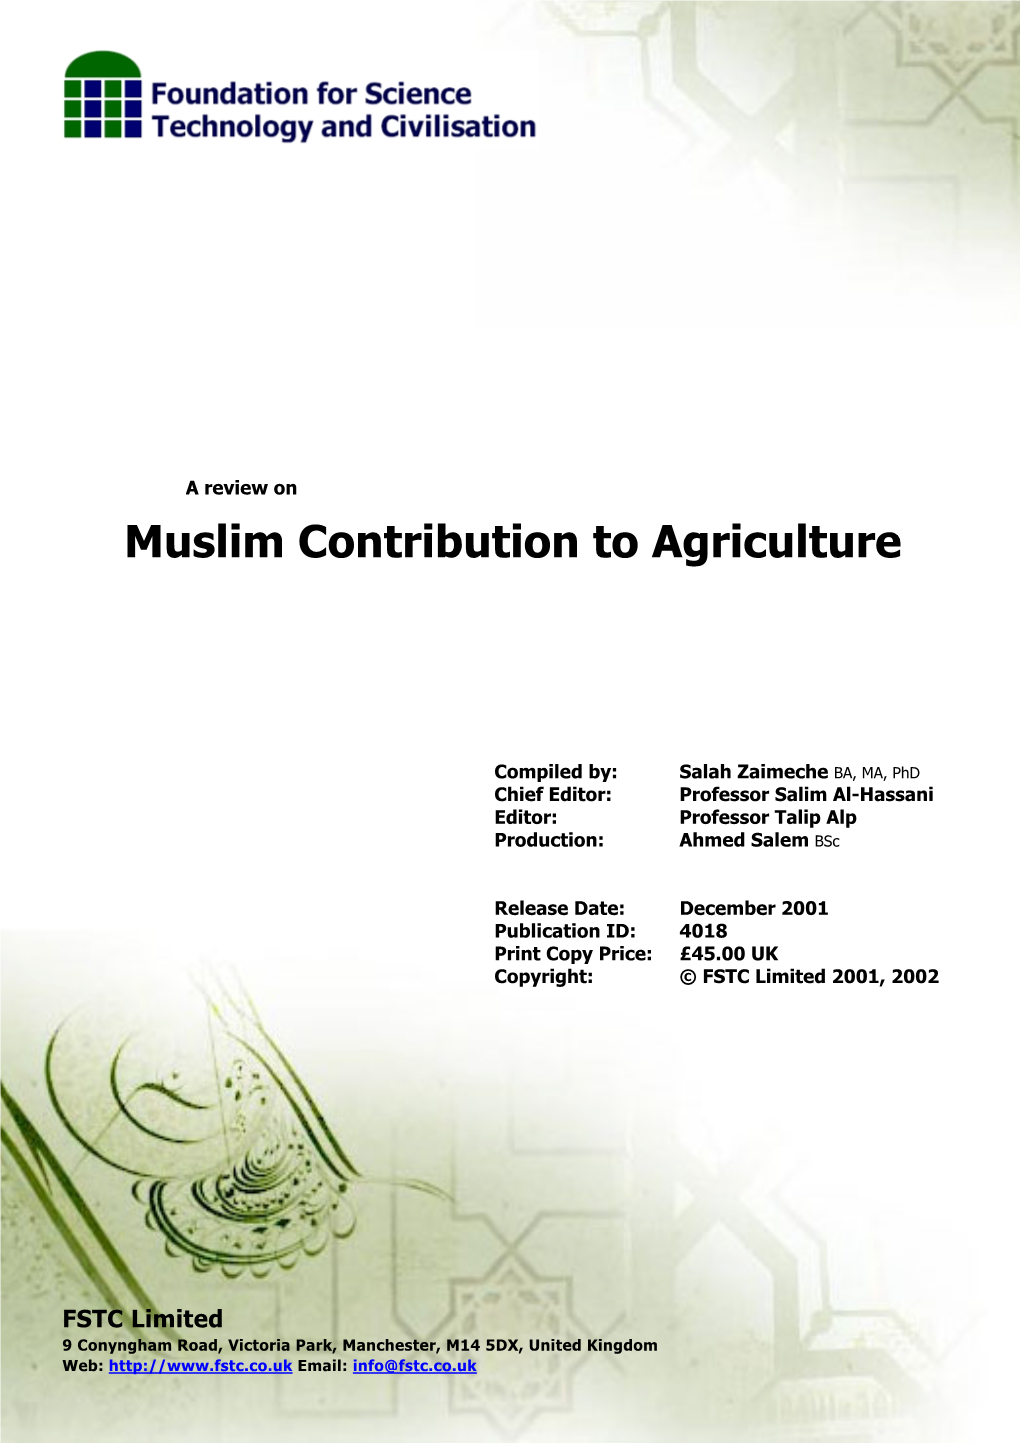 Muslim Contribution to Agriculture